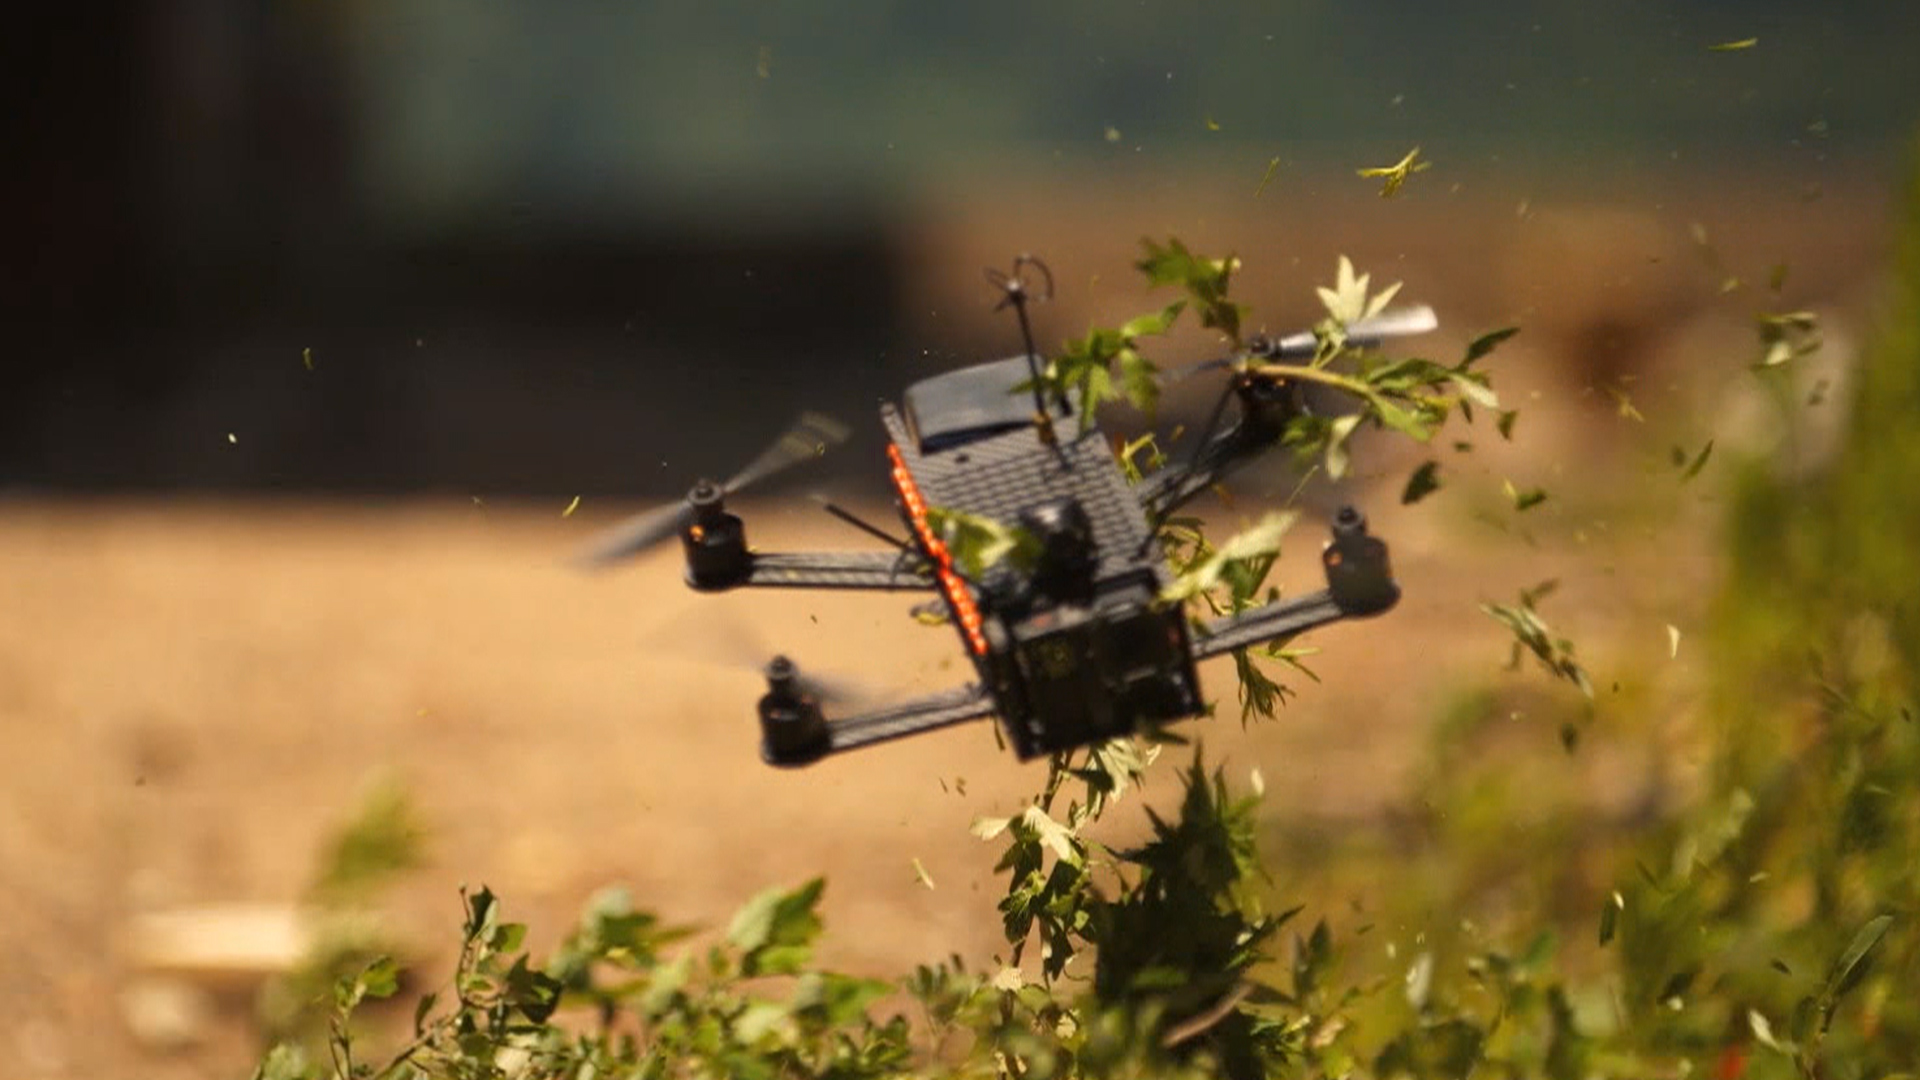 Drone racing is a new sport with sky high ambitions - TODAY.com1920 x 1080